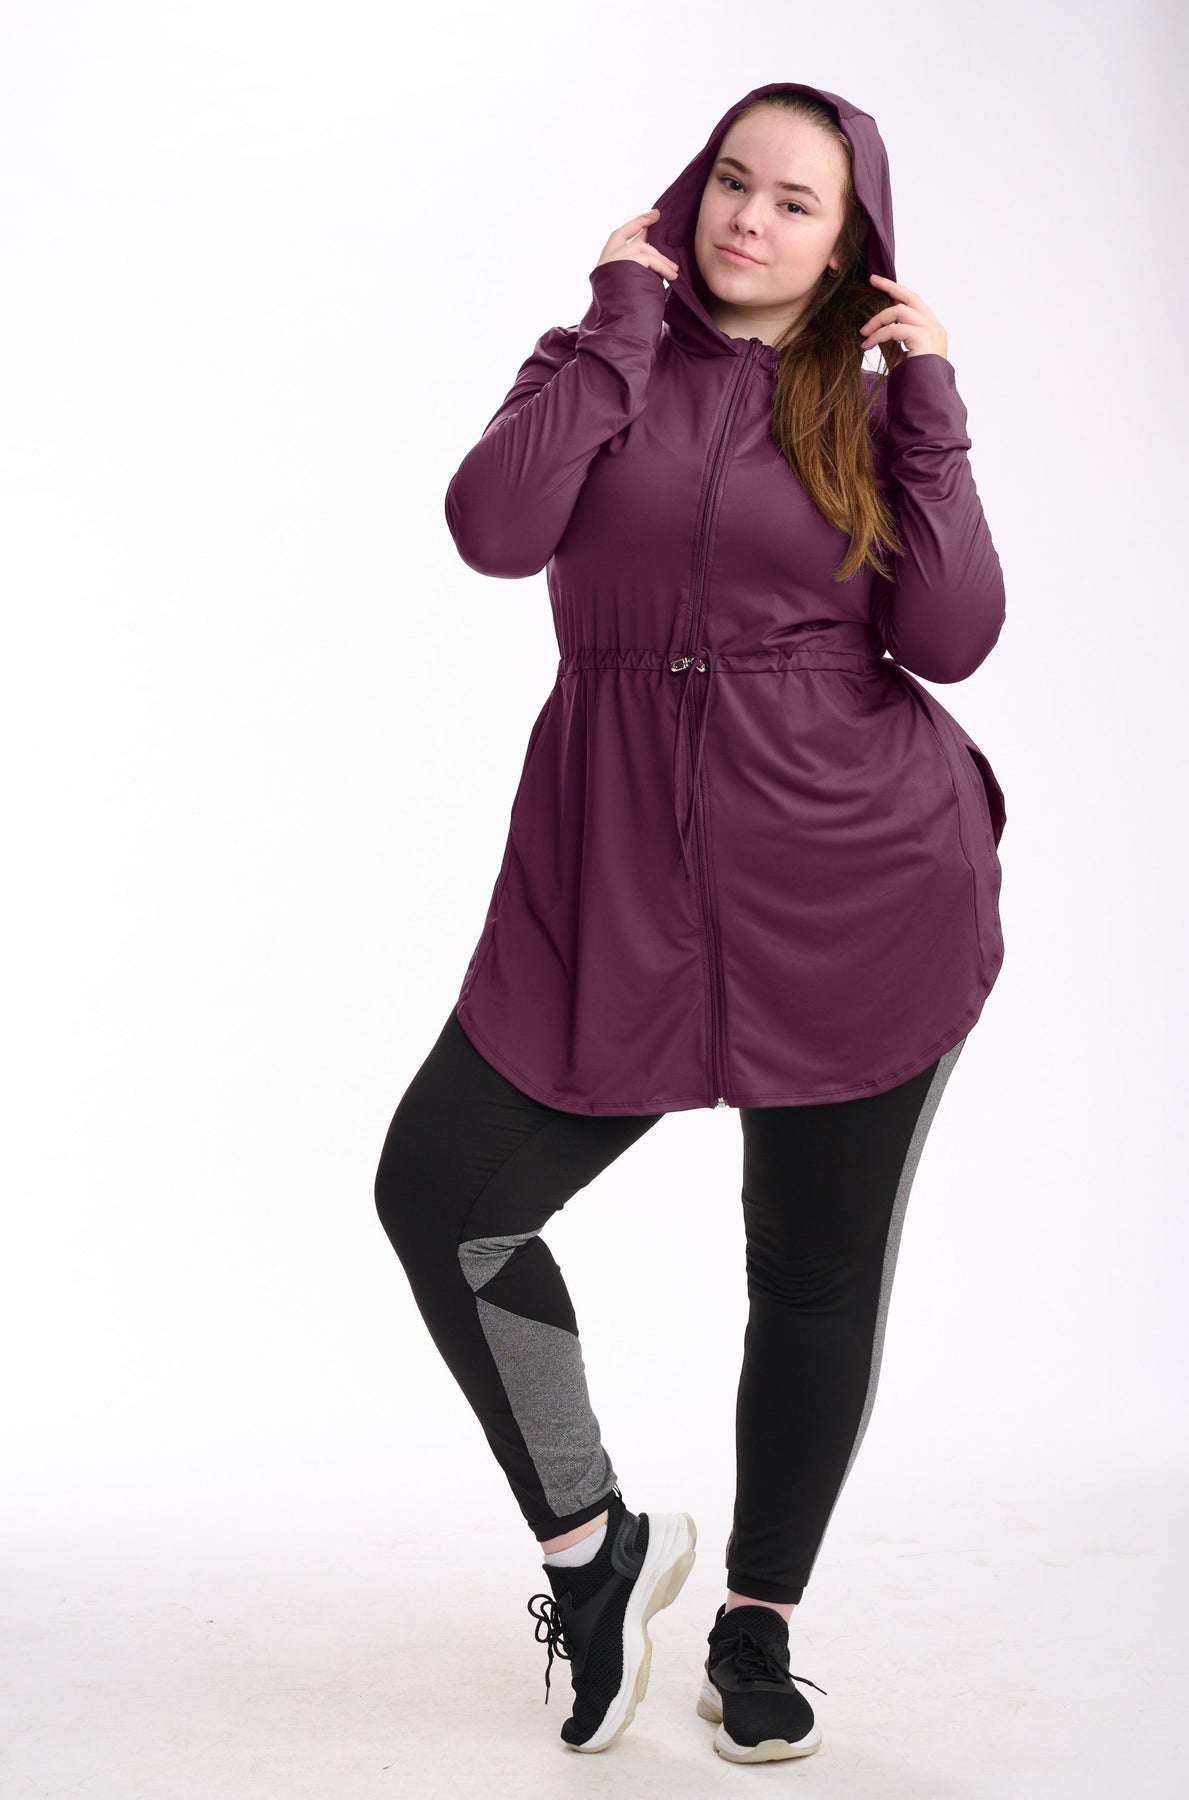 Performance Tech Hooded Top - Black  Modest workout clothes, Modest  activewear, Tops for leggings